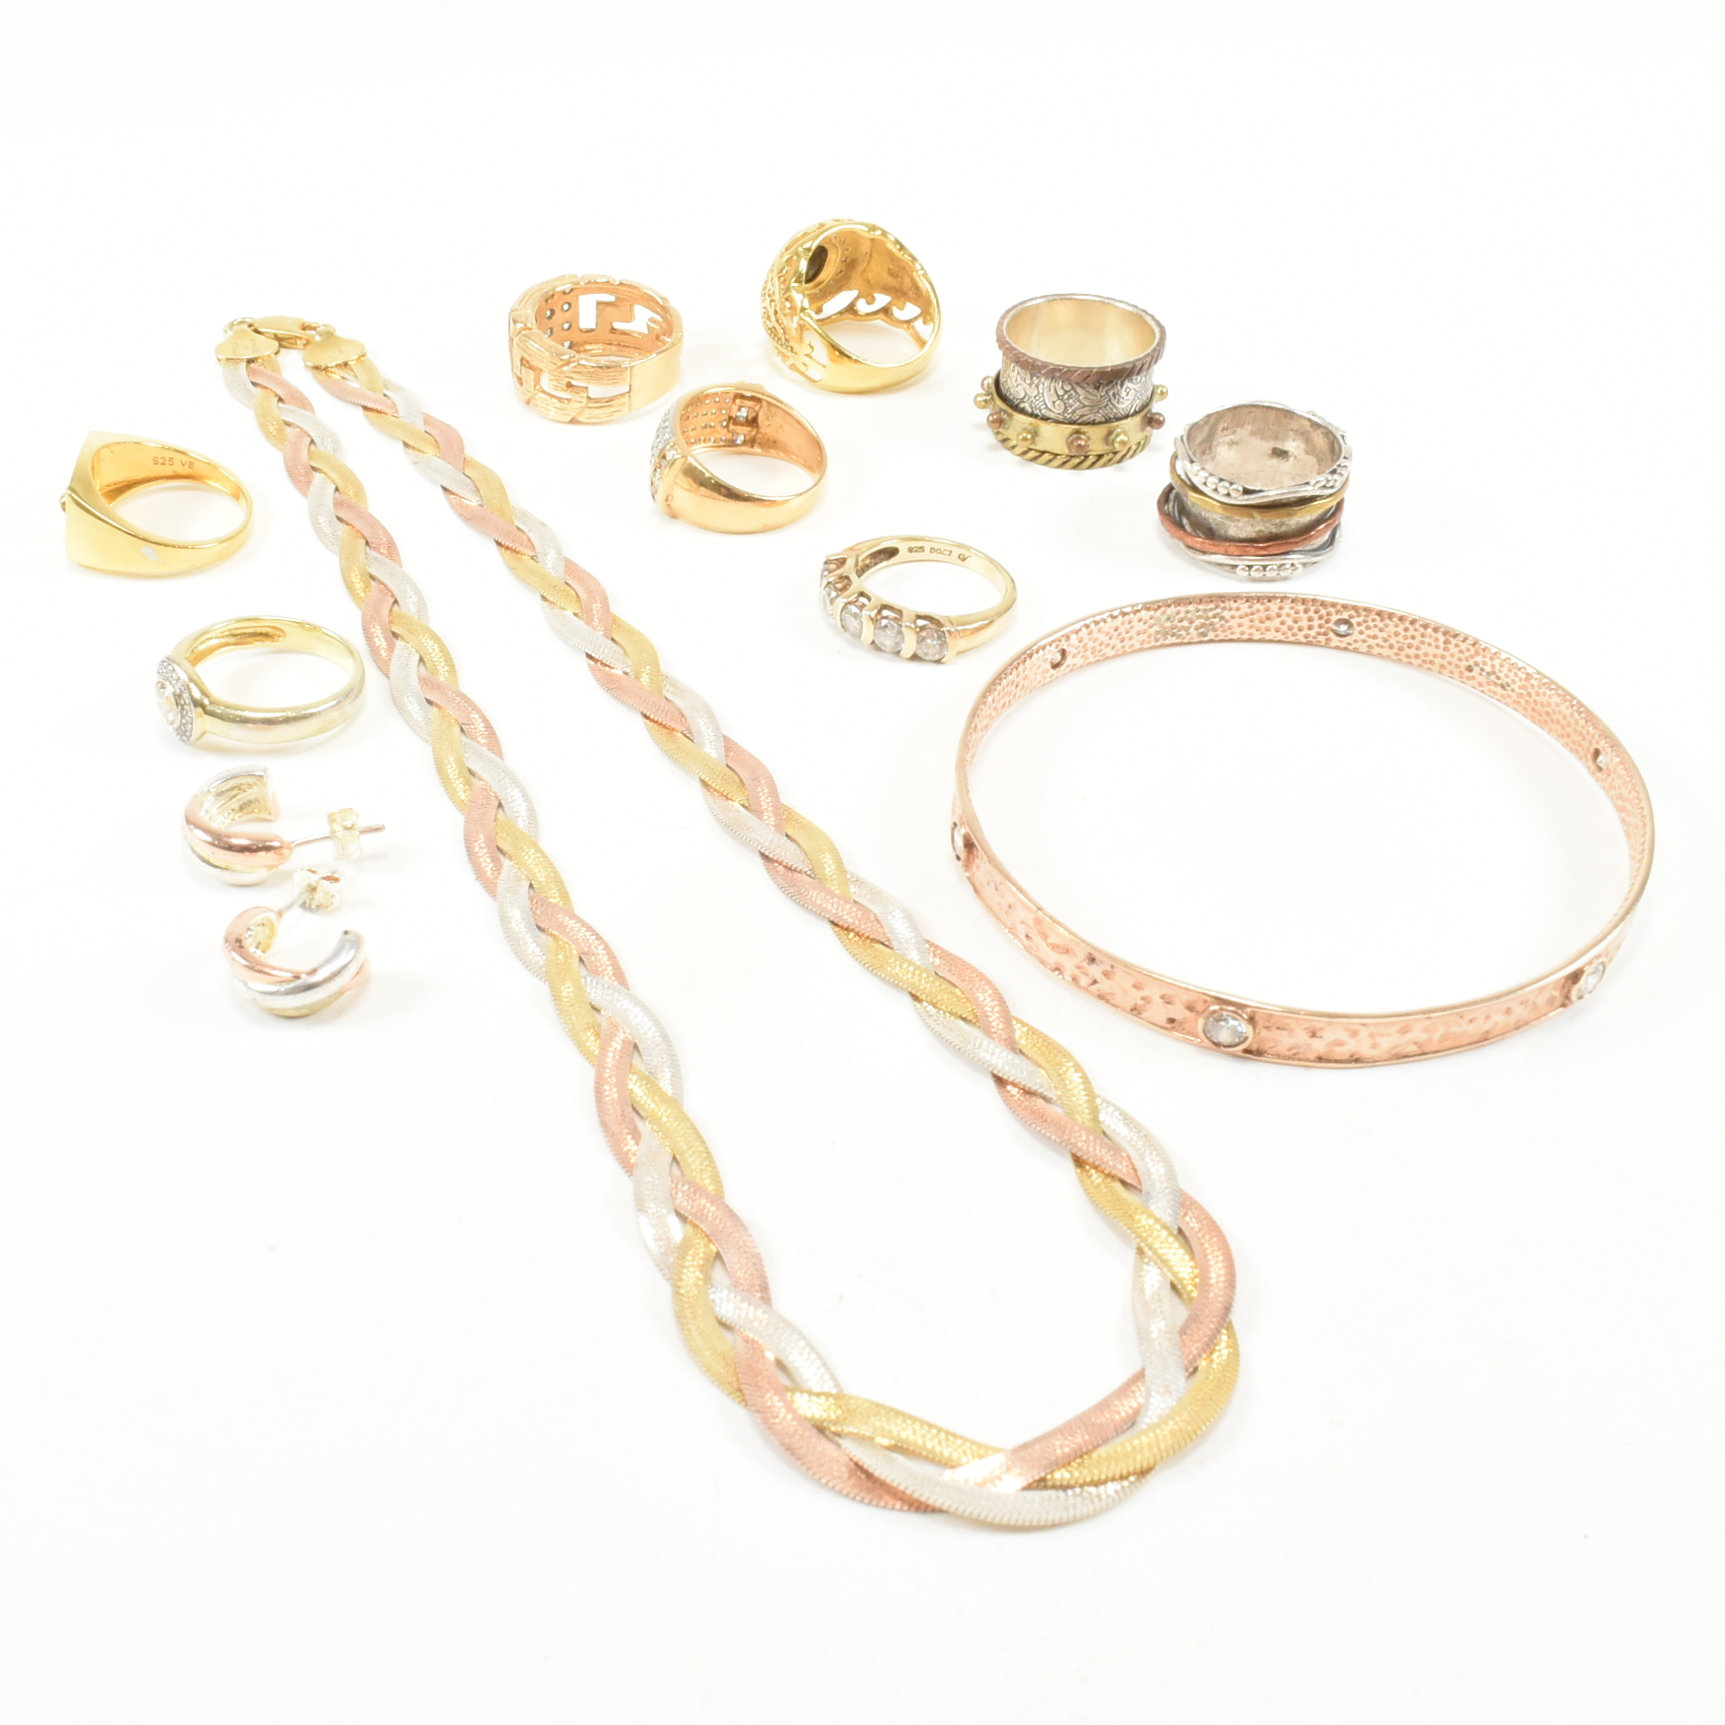 COLLECTION OF ASSORTED 925 SILVER GOLD TONE JEWELLERY - Image 5 of 11